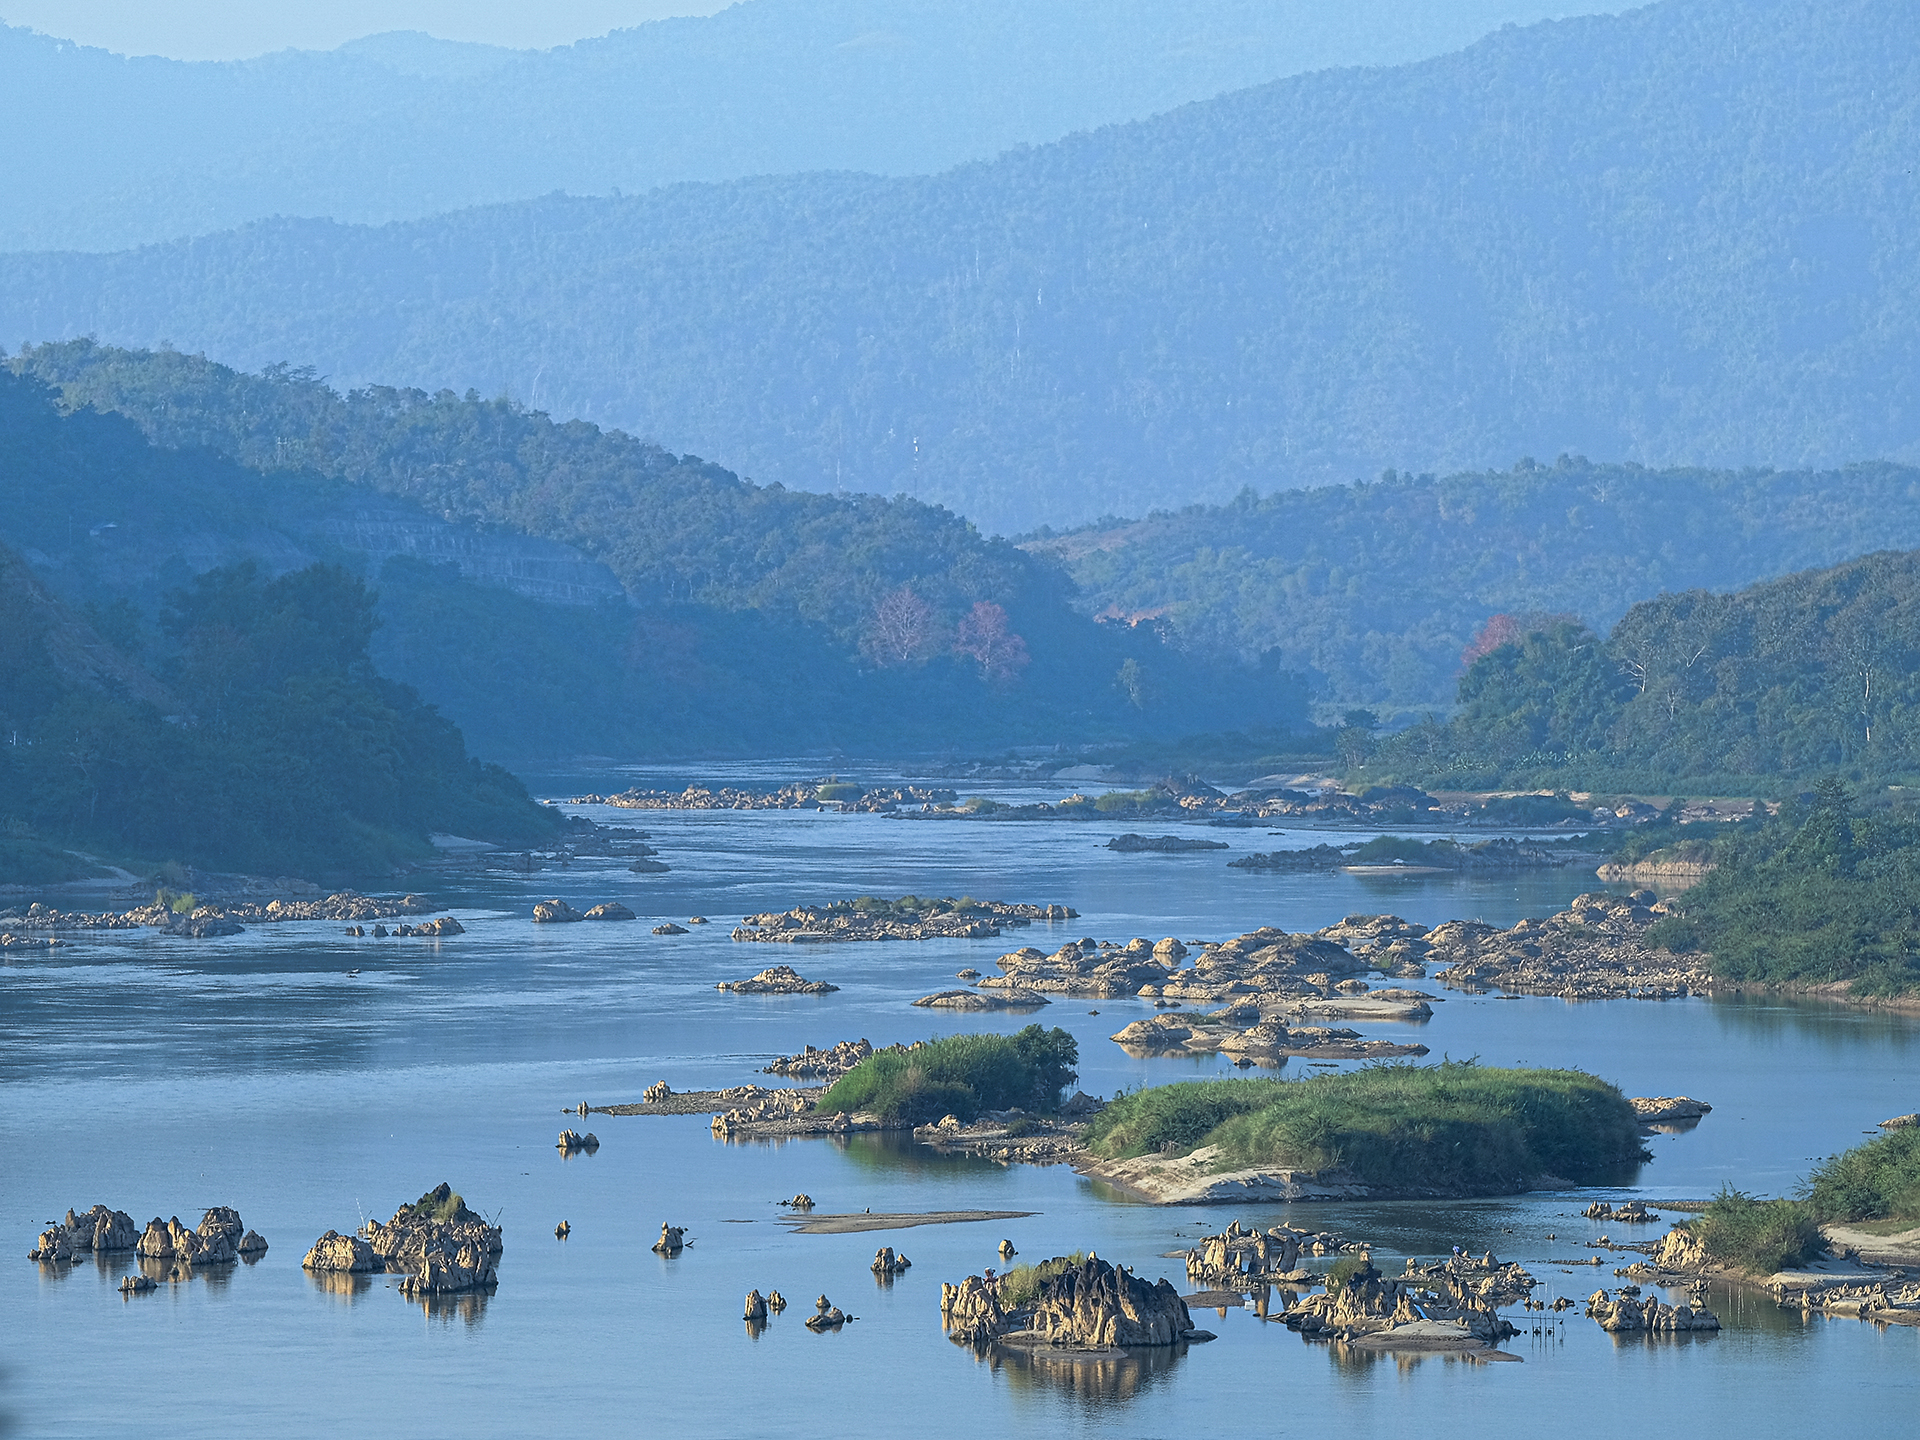 Mekong River with small grassy islands dispersed throughout the river with mountainous hills in background.